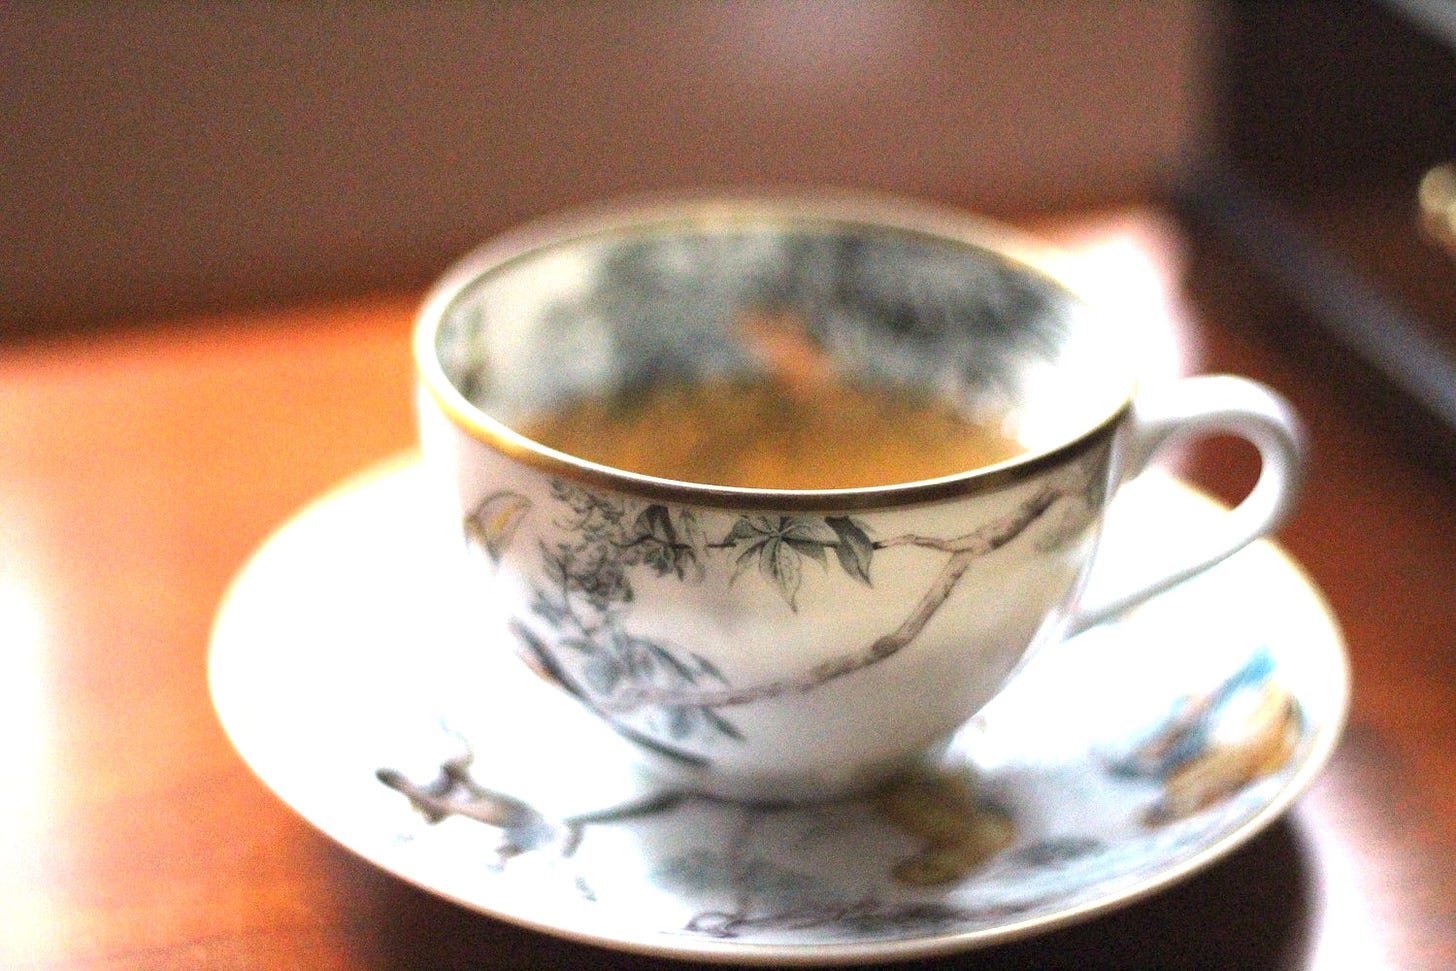 Hermes Jungle Teacup With Gold Rim